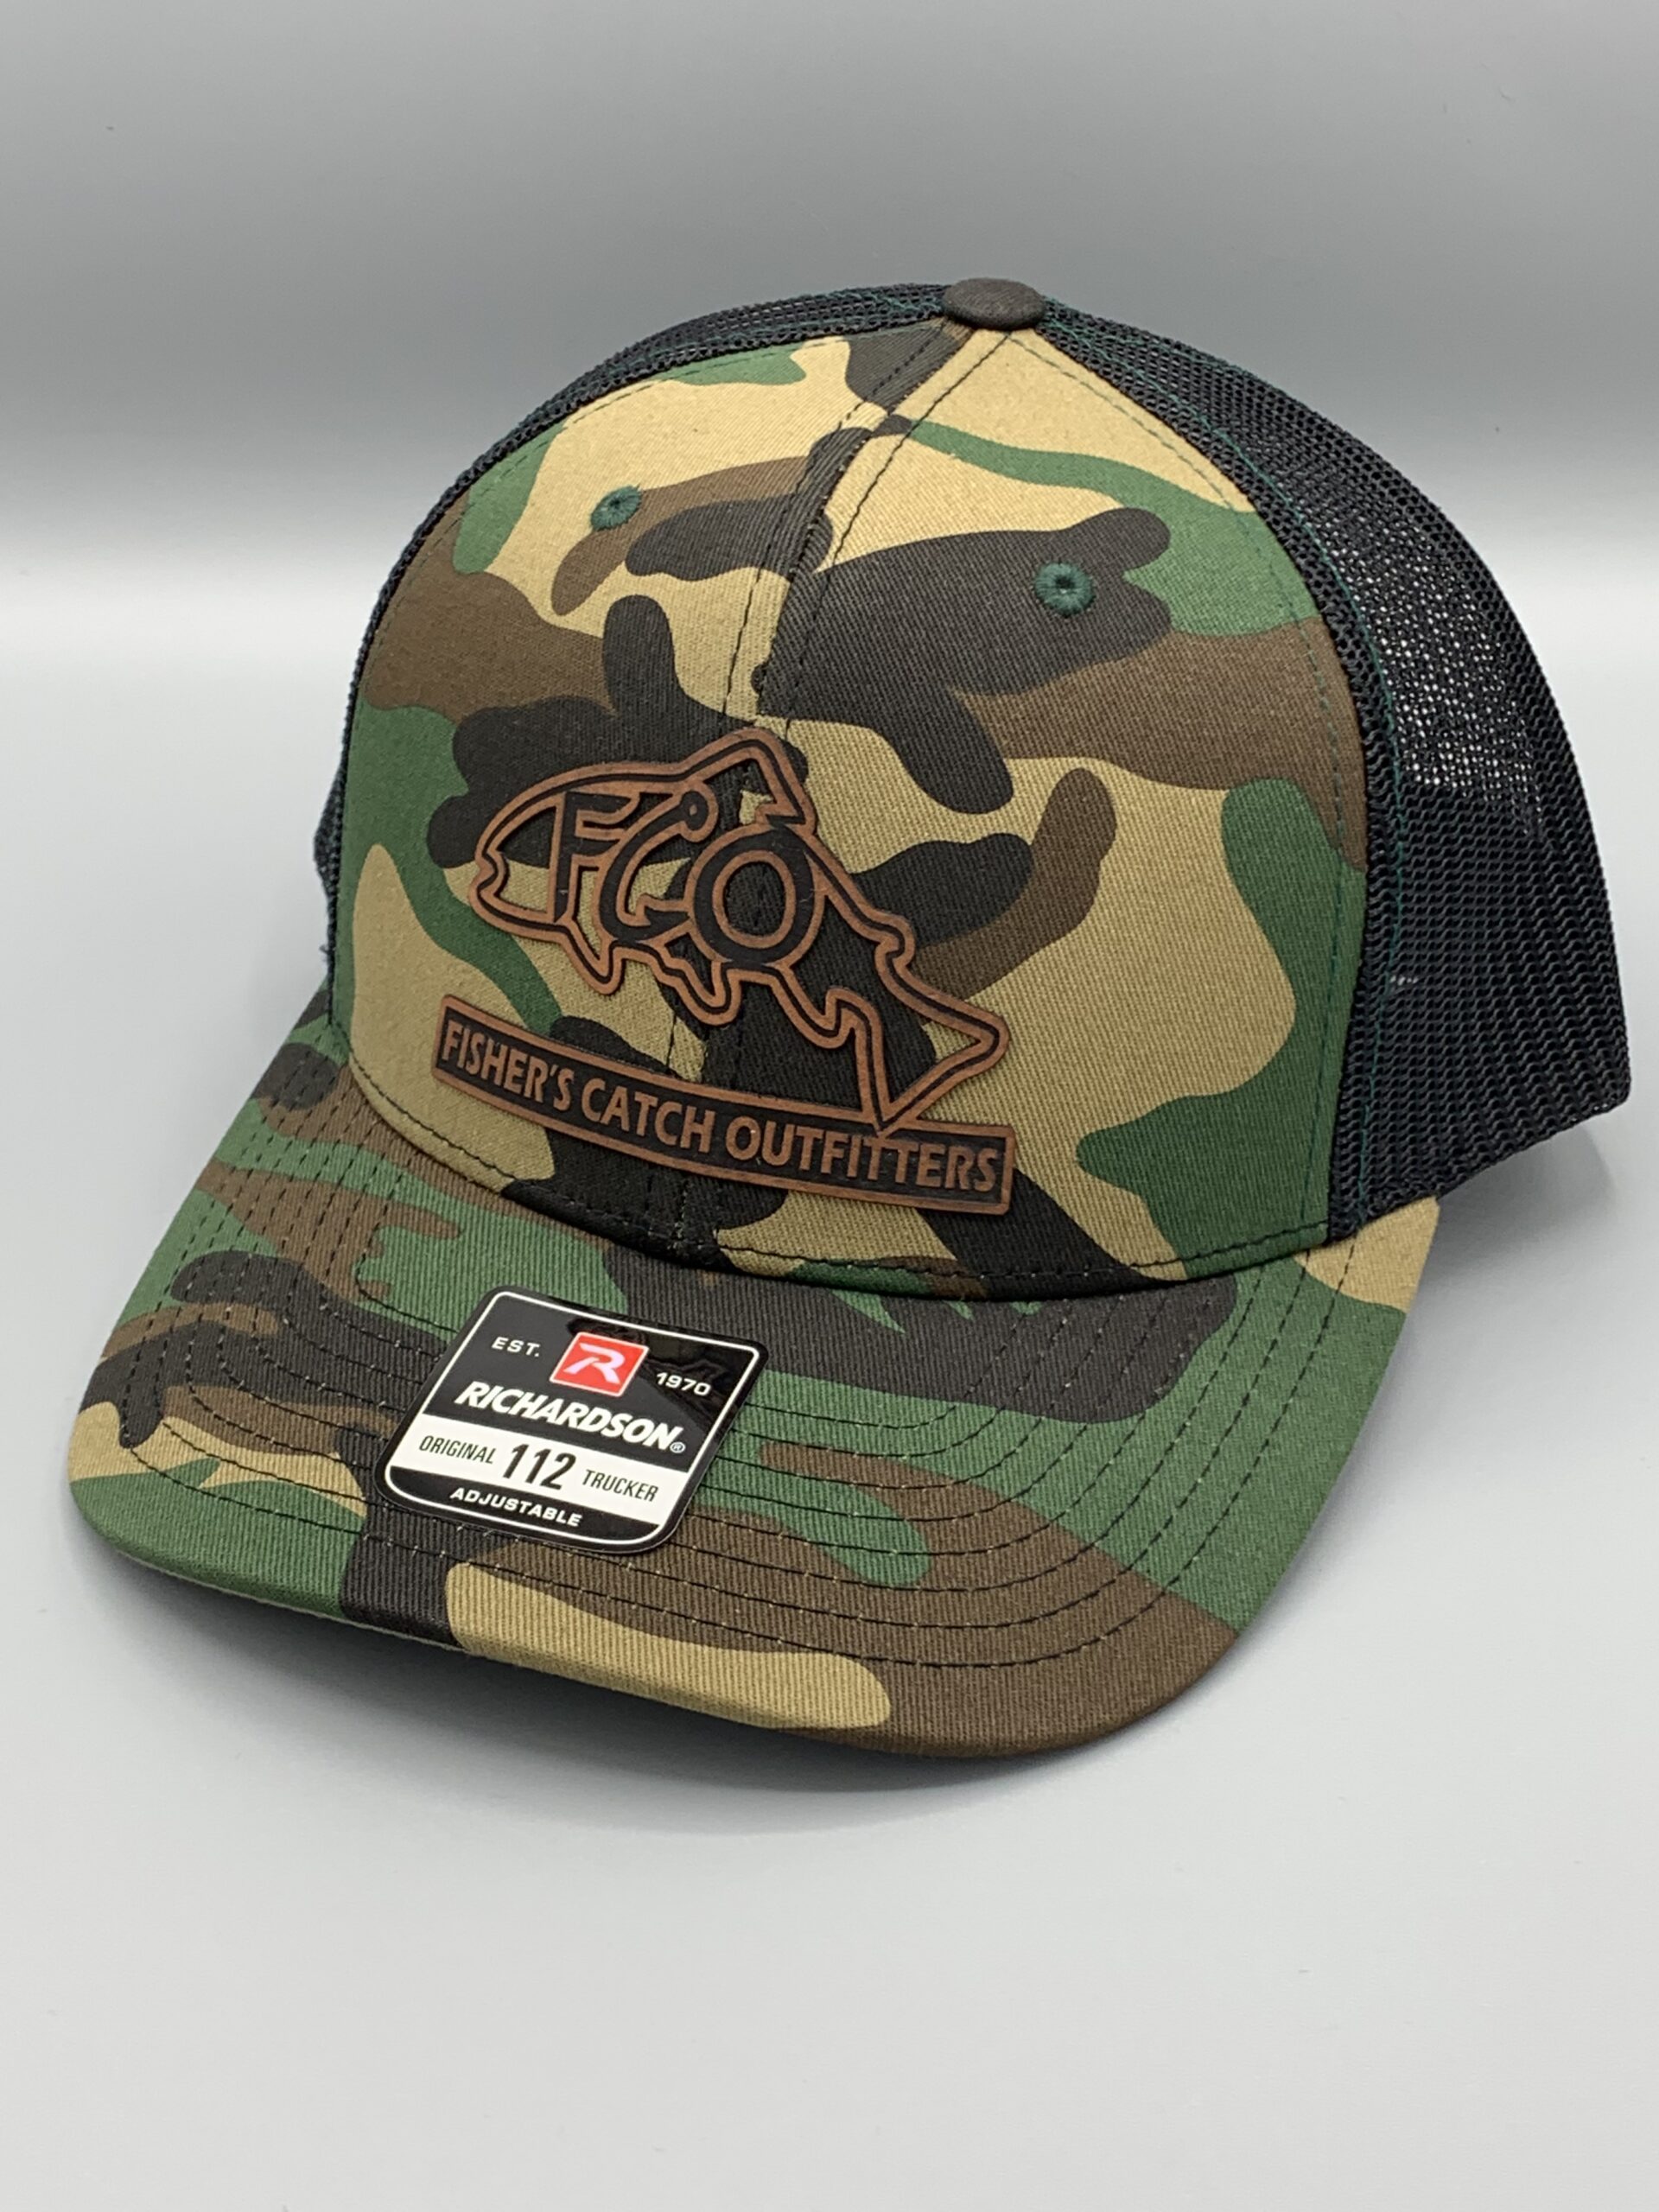 Fishers Catch Outfitters Camo Hat – Fishers Catch Outfitters